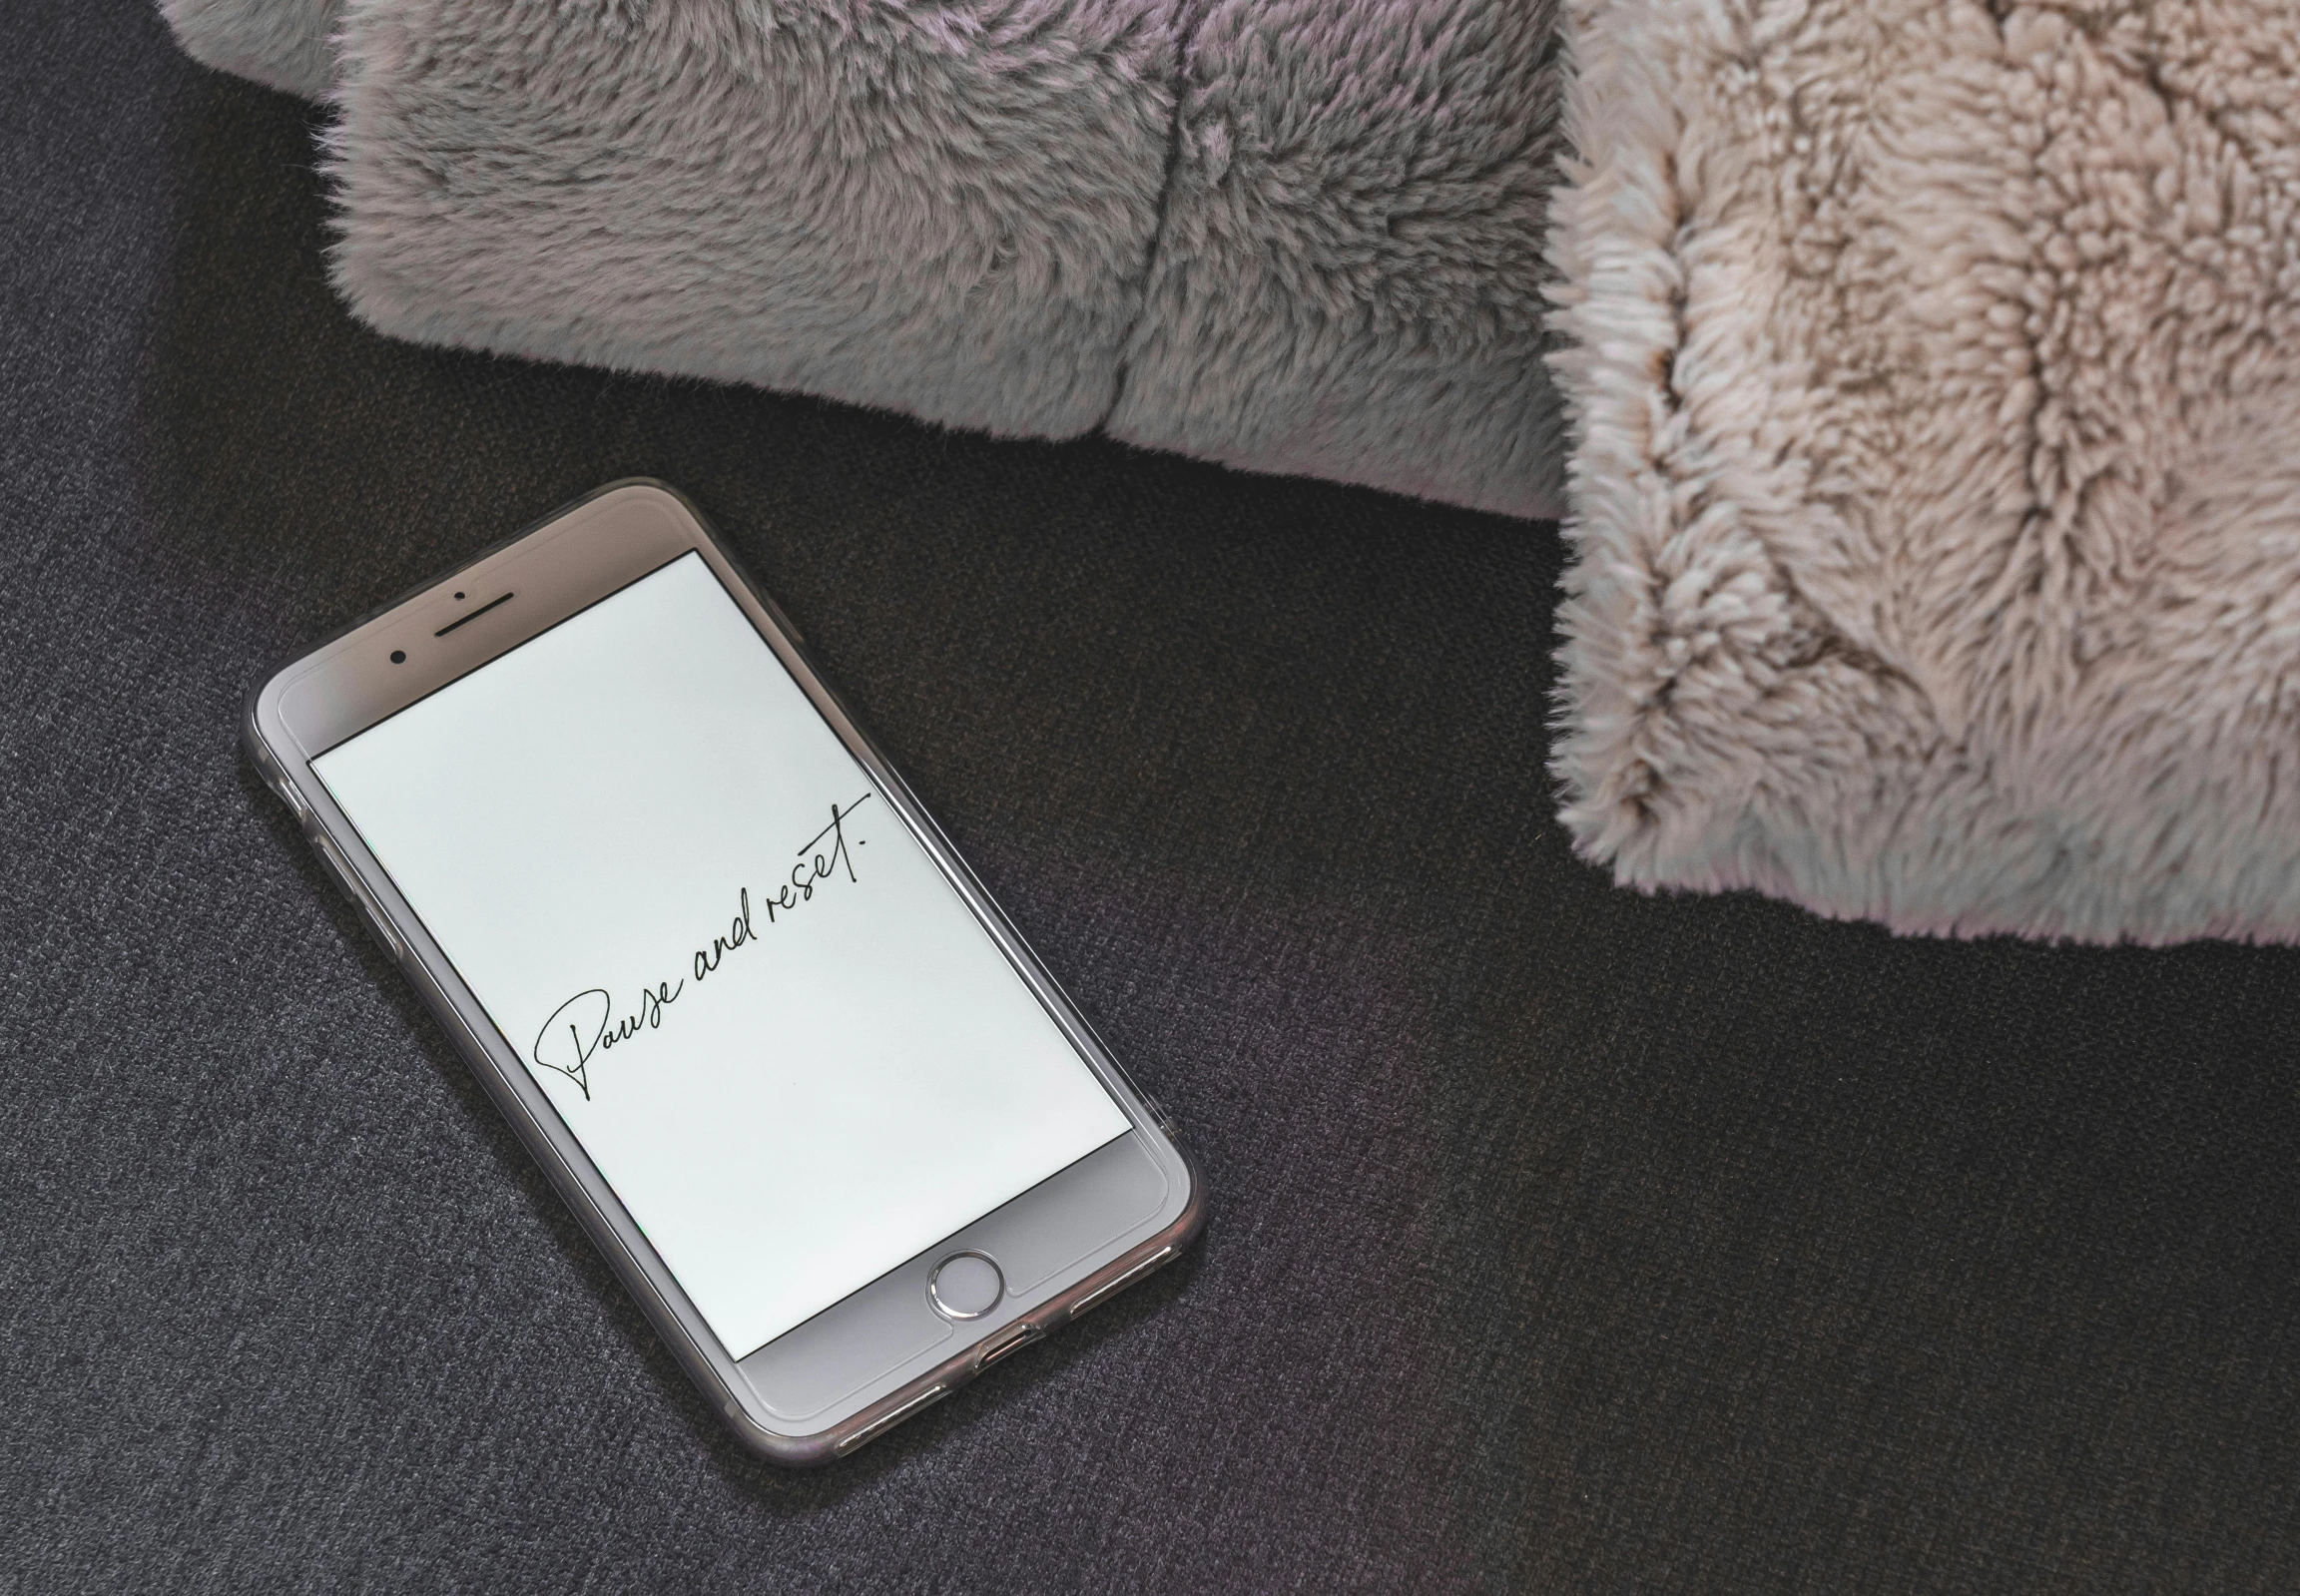 a cell phone sitting next to a teddy bear, pexels contest winner, “modern calligraphy art, white bed, background image, embroidered velvet